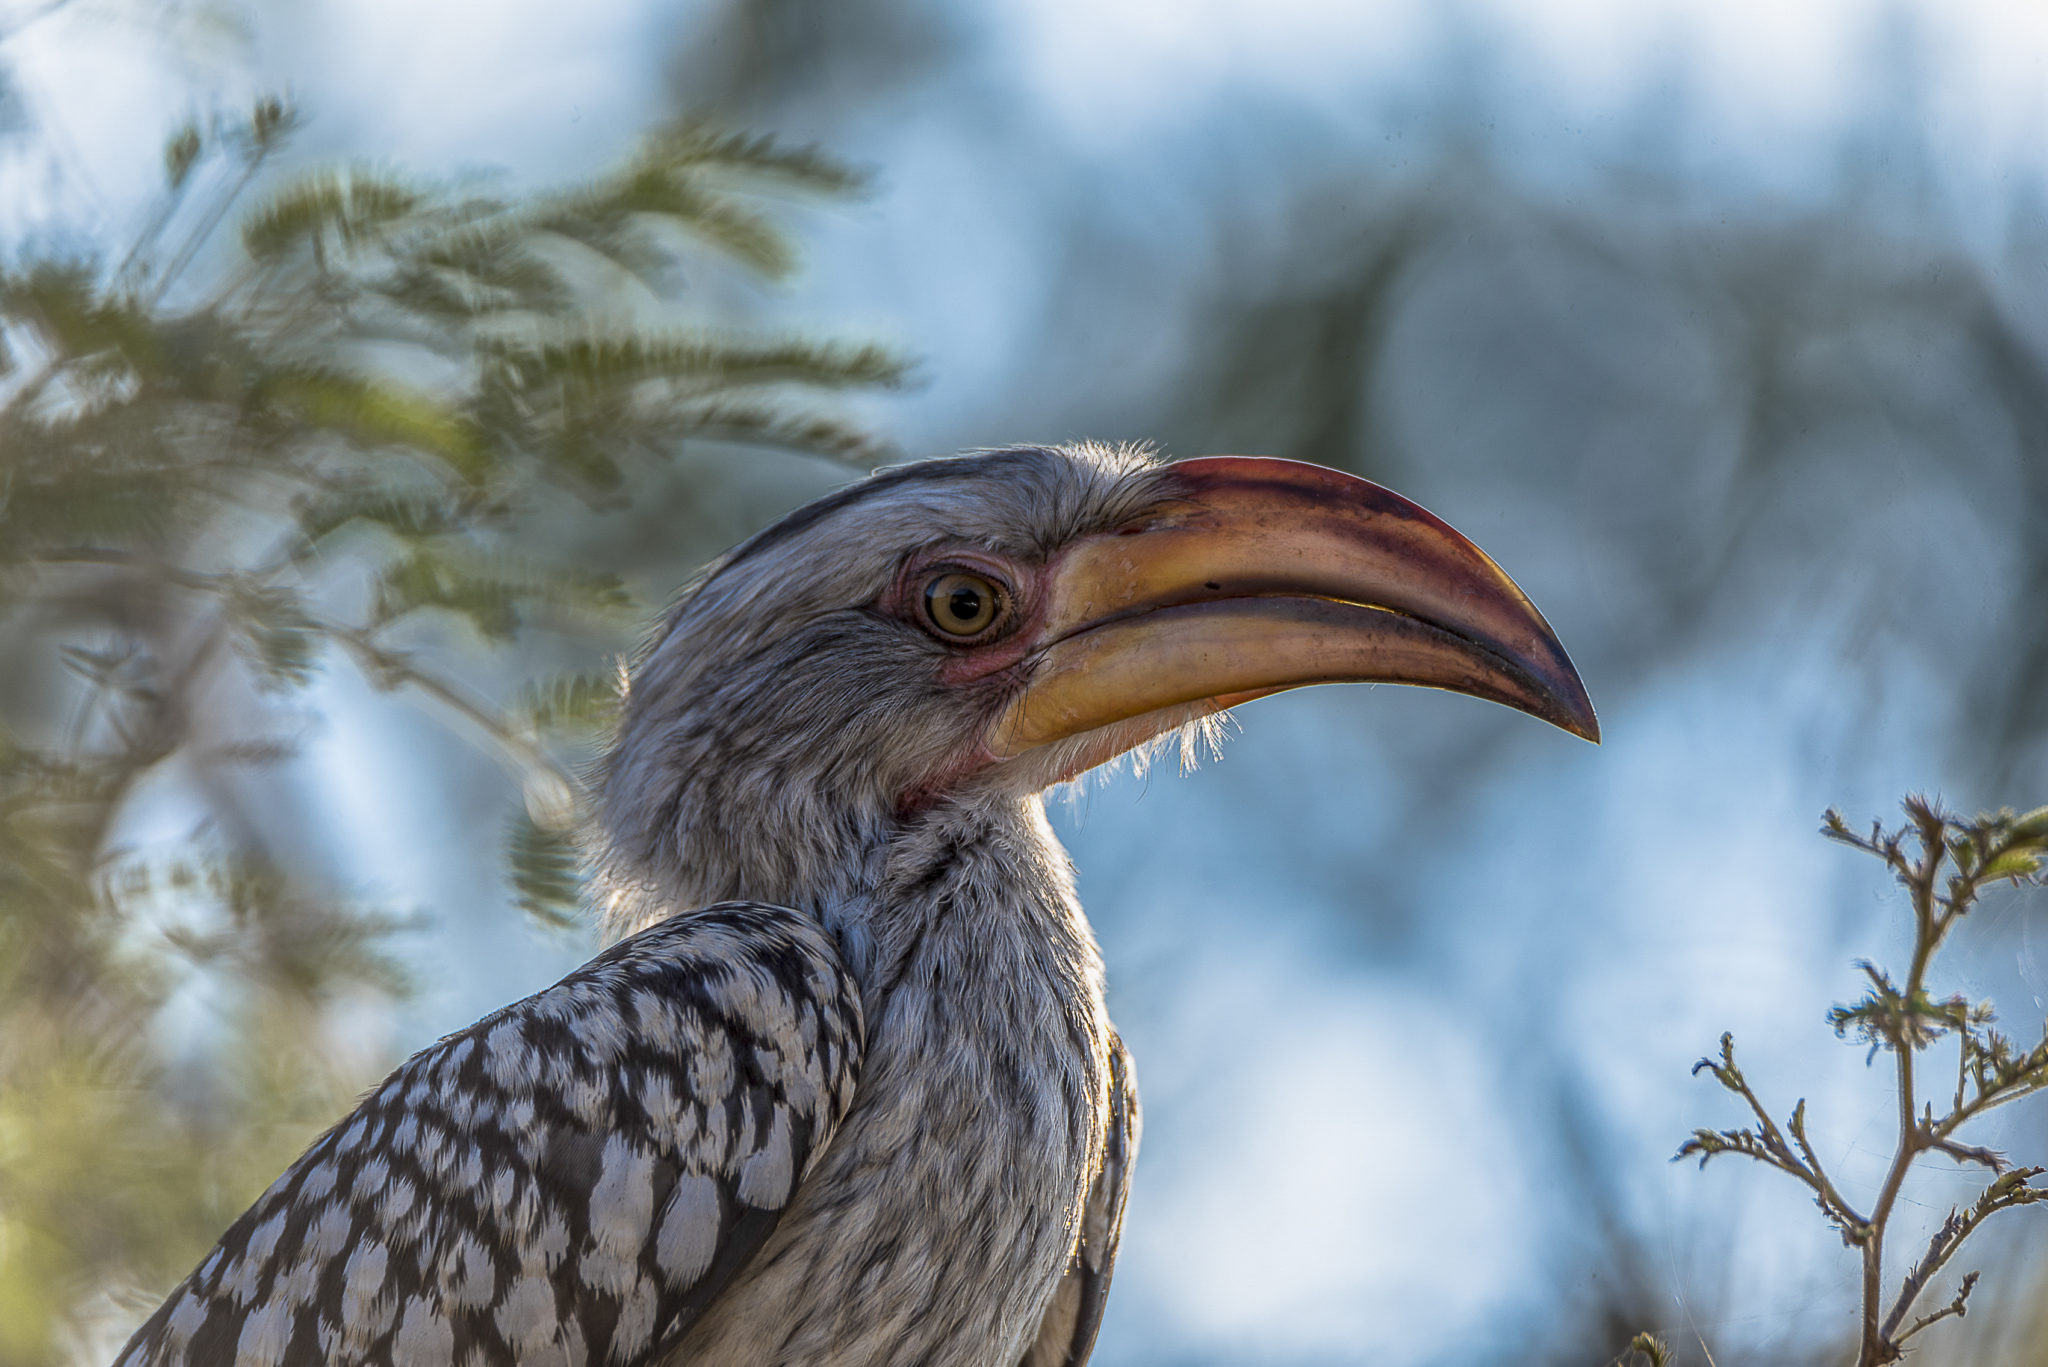 Face of the Southern Yellow Billed Hornbill – South Africa